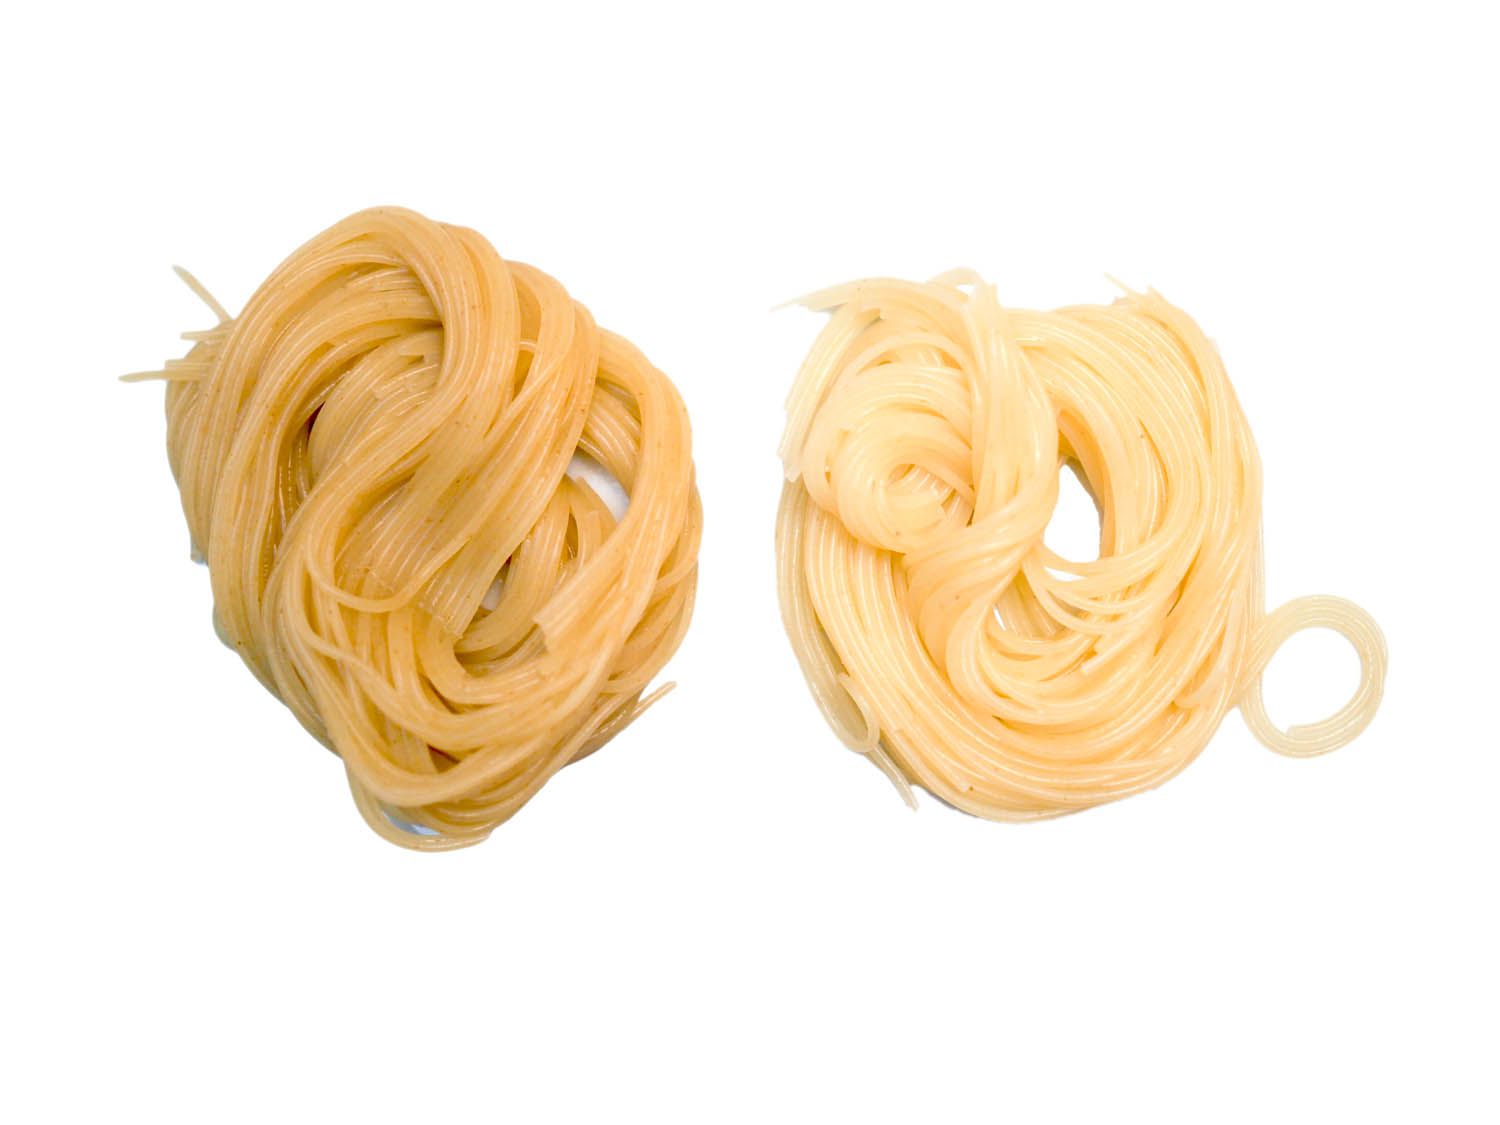 Side by side comparison of angel hair pasta cooked with baking soda and without. The pasta cooked with baking soda has a deeper yellow color.